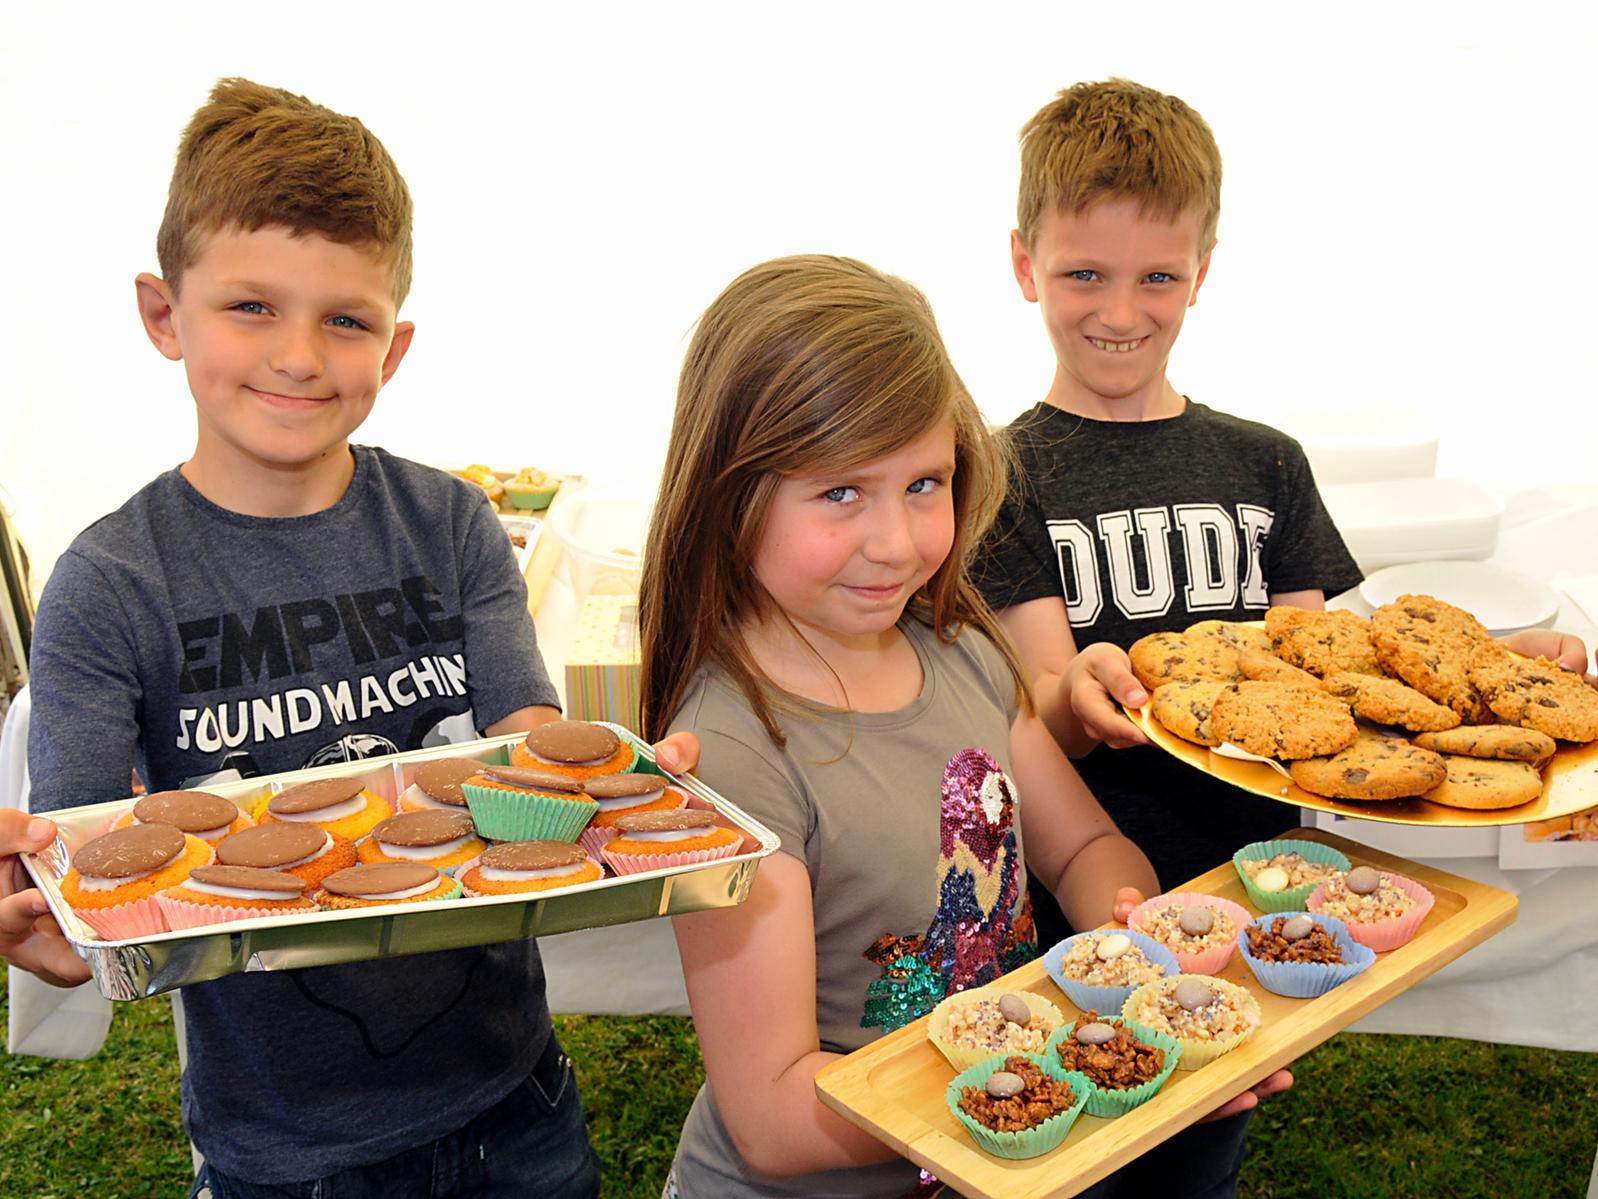 Youngsters from The Oval in Killingbeck held a cake sale and fundraiser for Half and Half. Pictured, from left, Jacob Shaw, Aimee Gardner and Harrison Shaw.